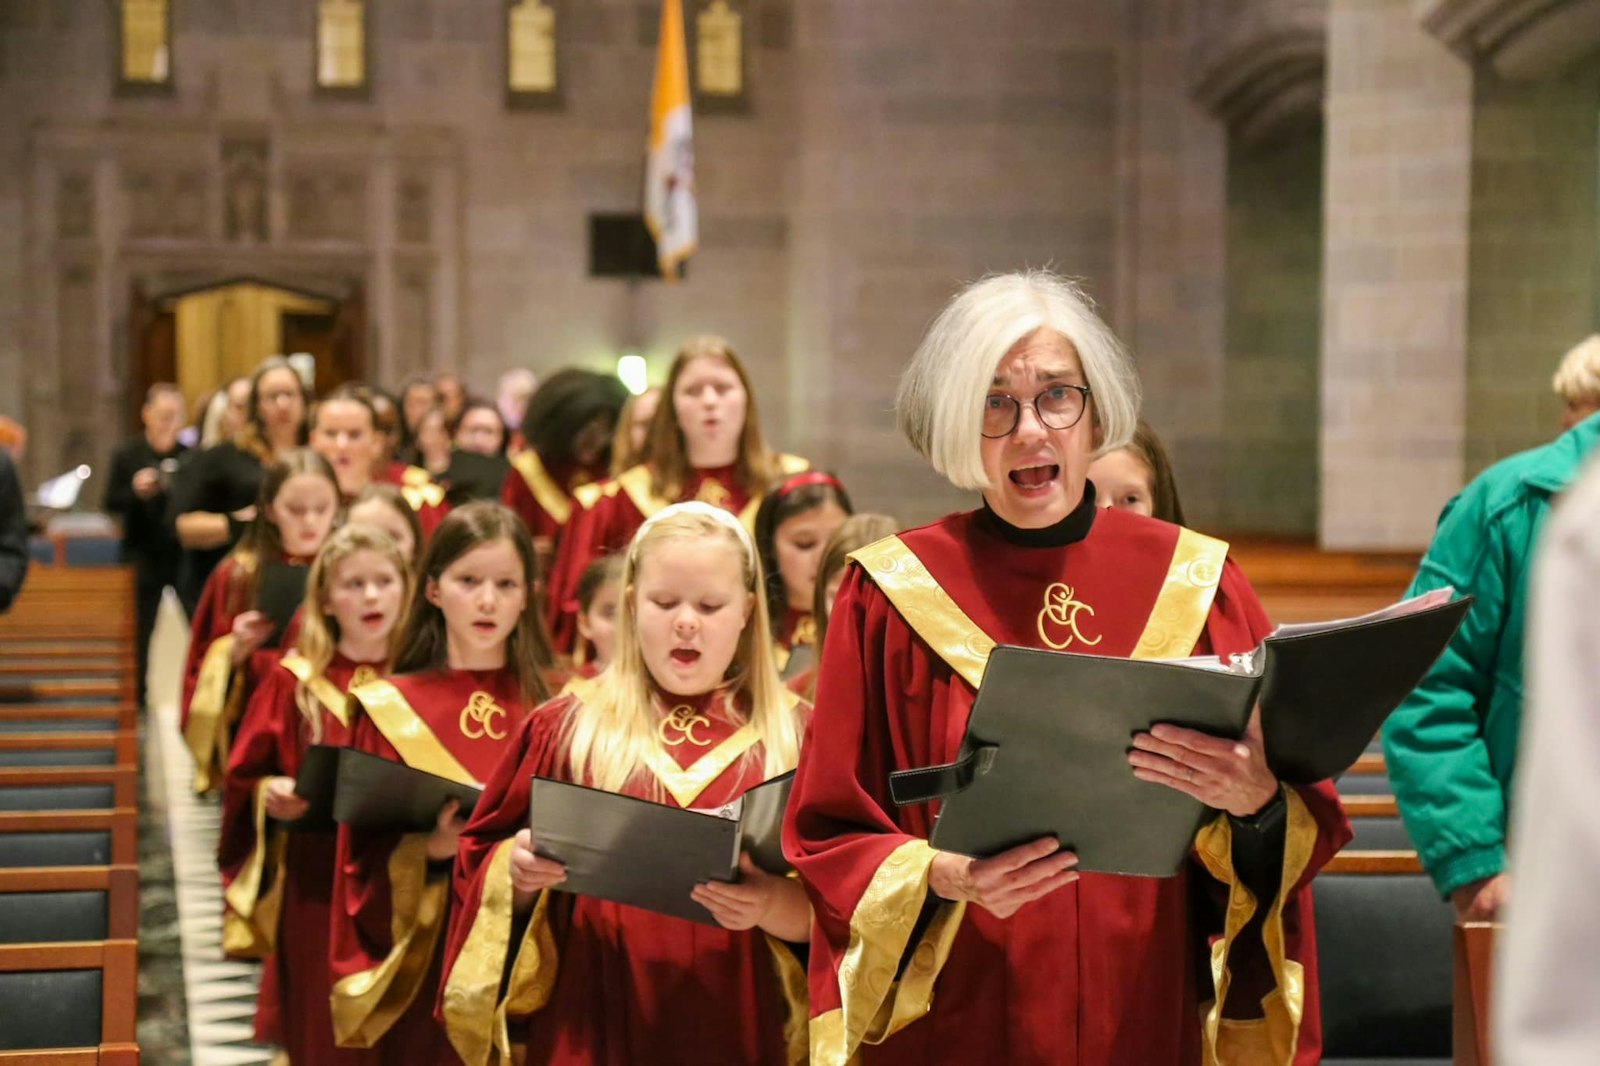 Susan Lindquist, director of the Cathedral Choir Academy of Detroit, leads youth singers in procession during last year's "Festival of Lessons and Carols" at the Cathedral of the Most Blessed Sacrament in Detroit. This year's event, part of the Cathedral Cultural Series, will take place Dec. 15. (Jeremy Bastyr | Special to Detroit Catholic)